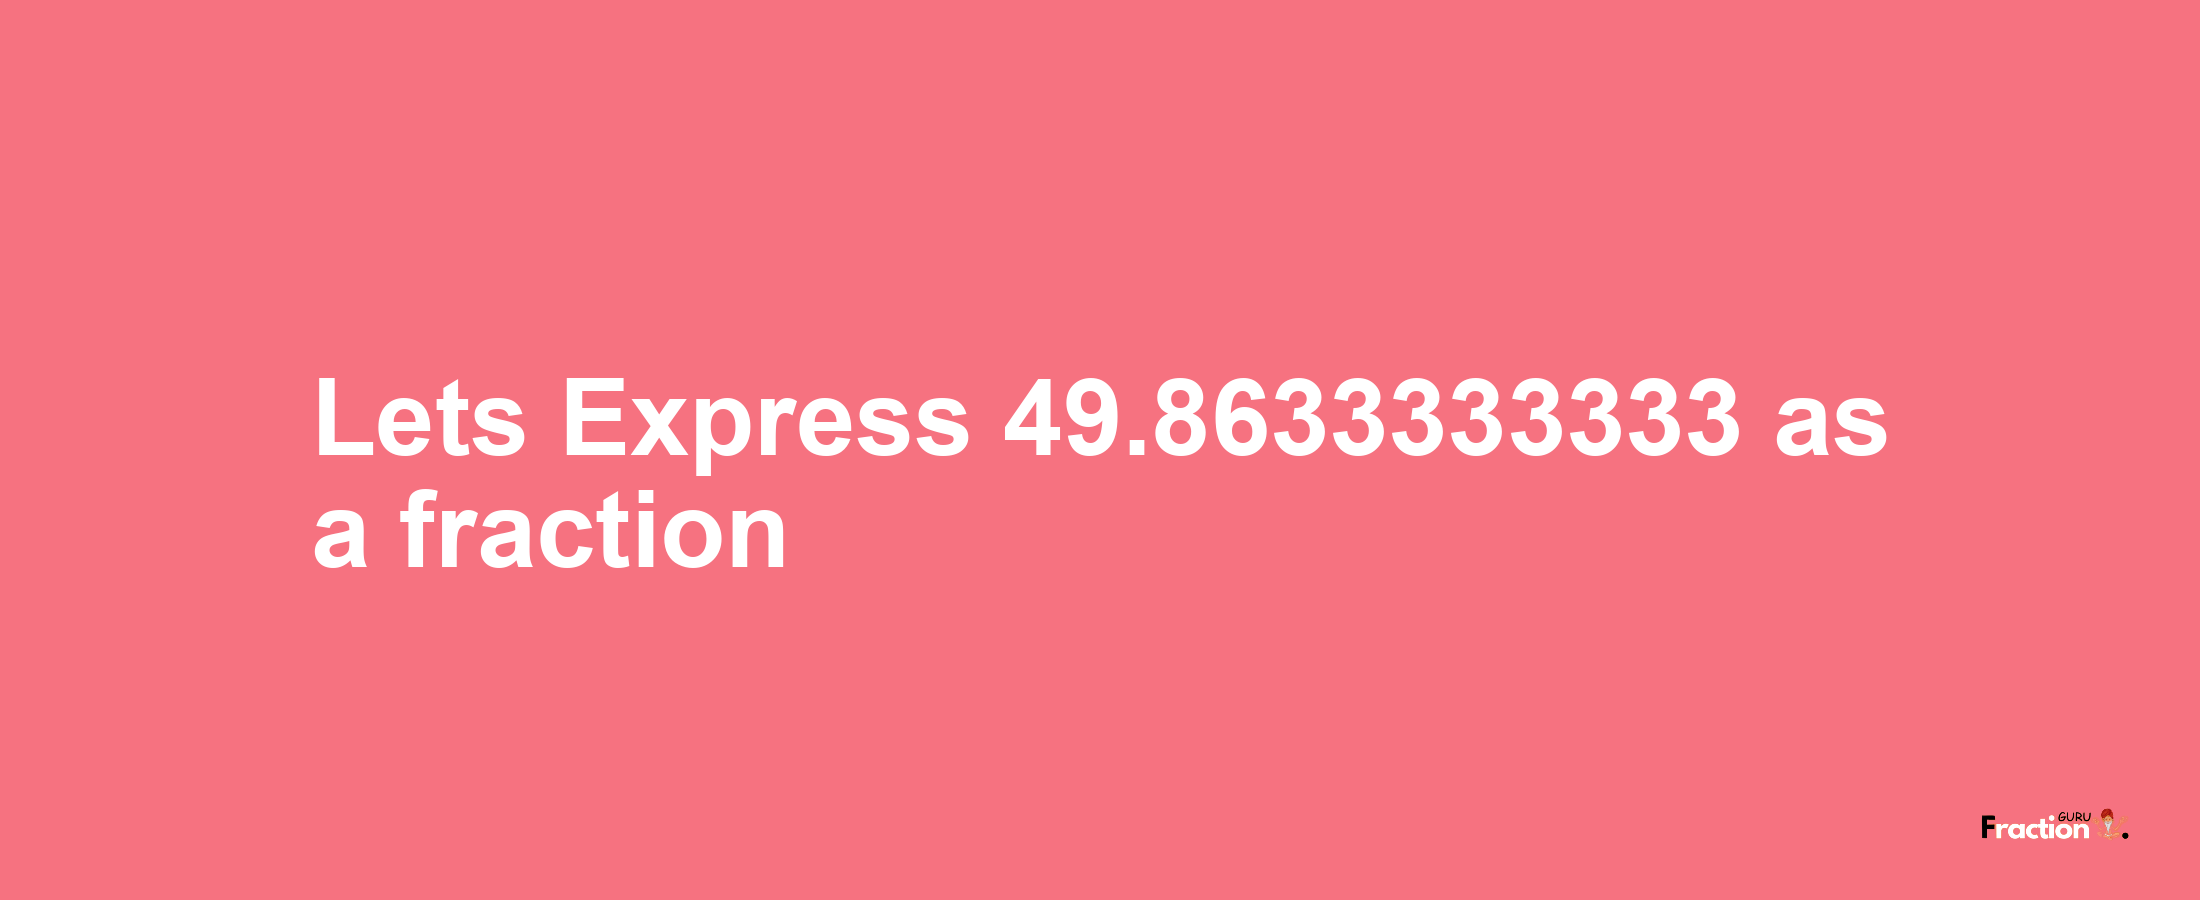 Lets Express 49.8633333333 as afraction